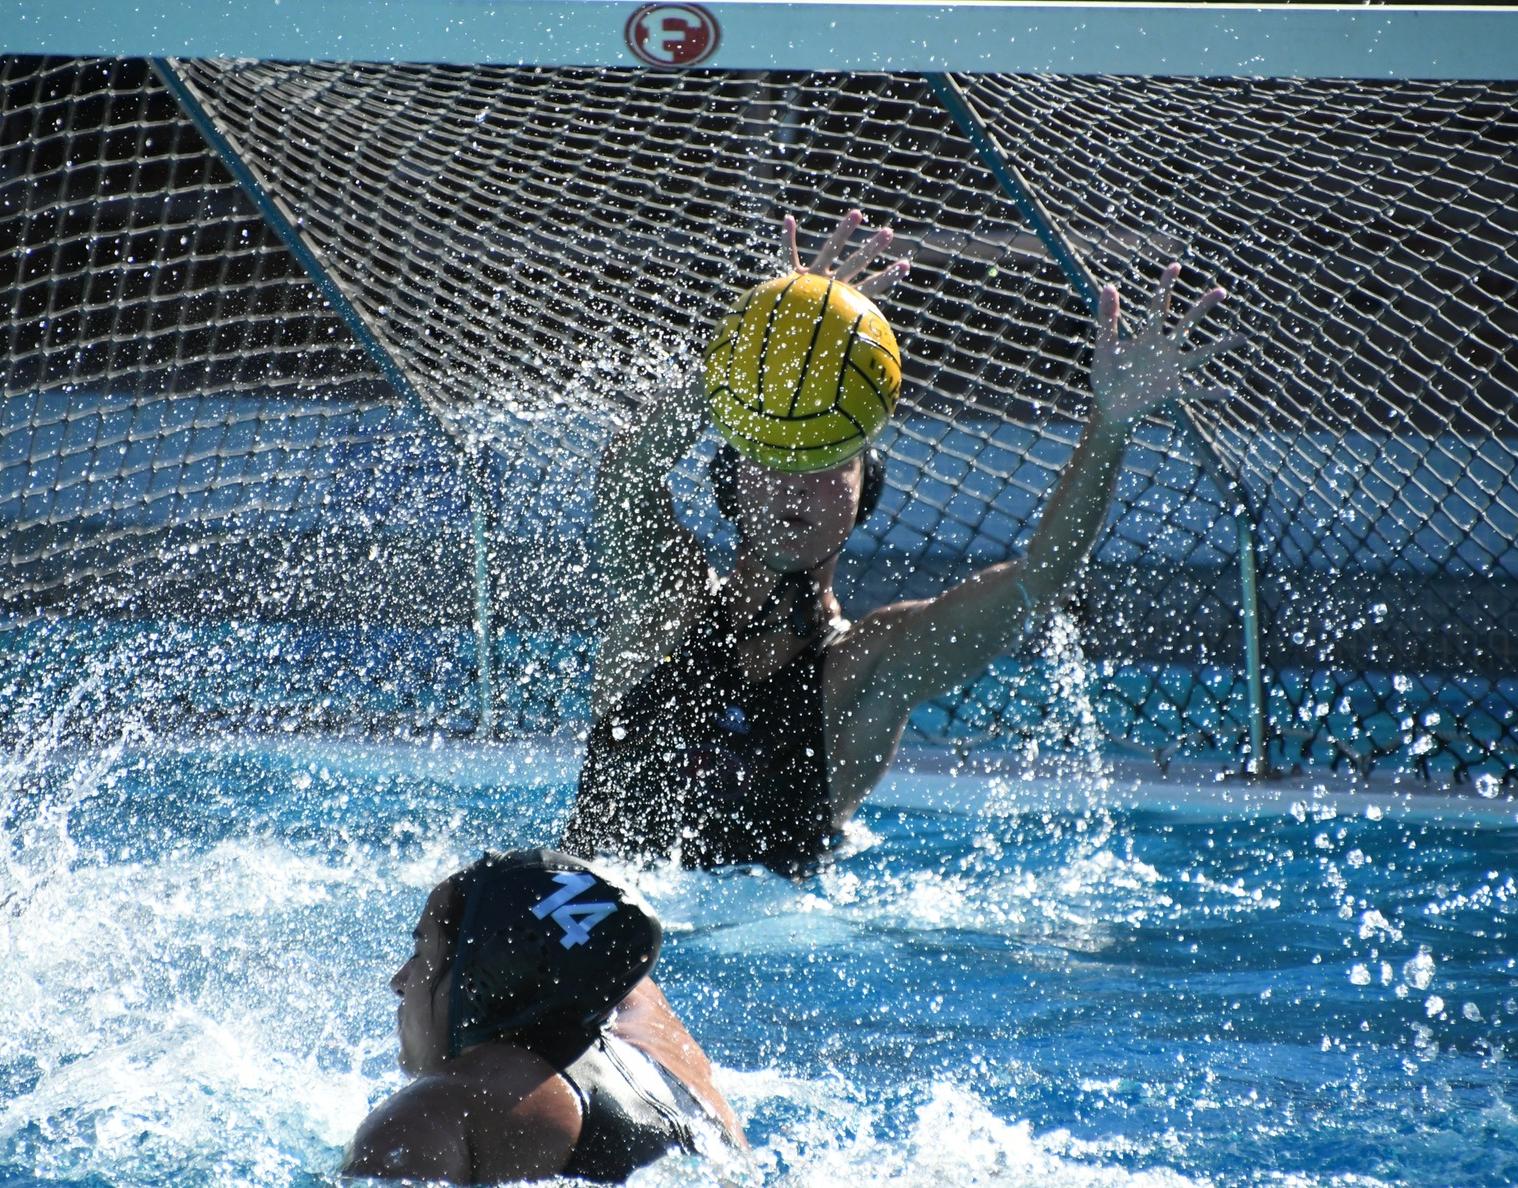 Save the date, Friday Oct 25th at 3pm. Water Polo vs. Cabrillo College